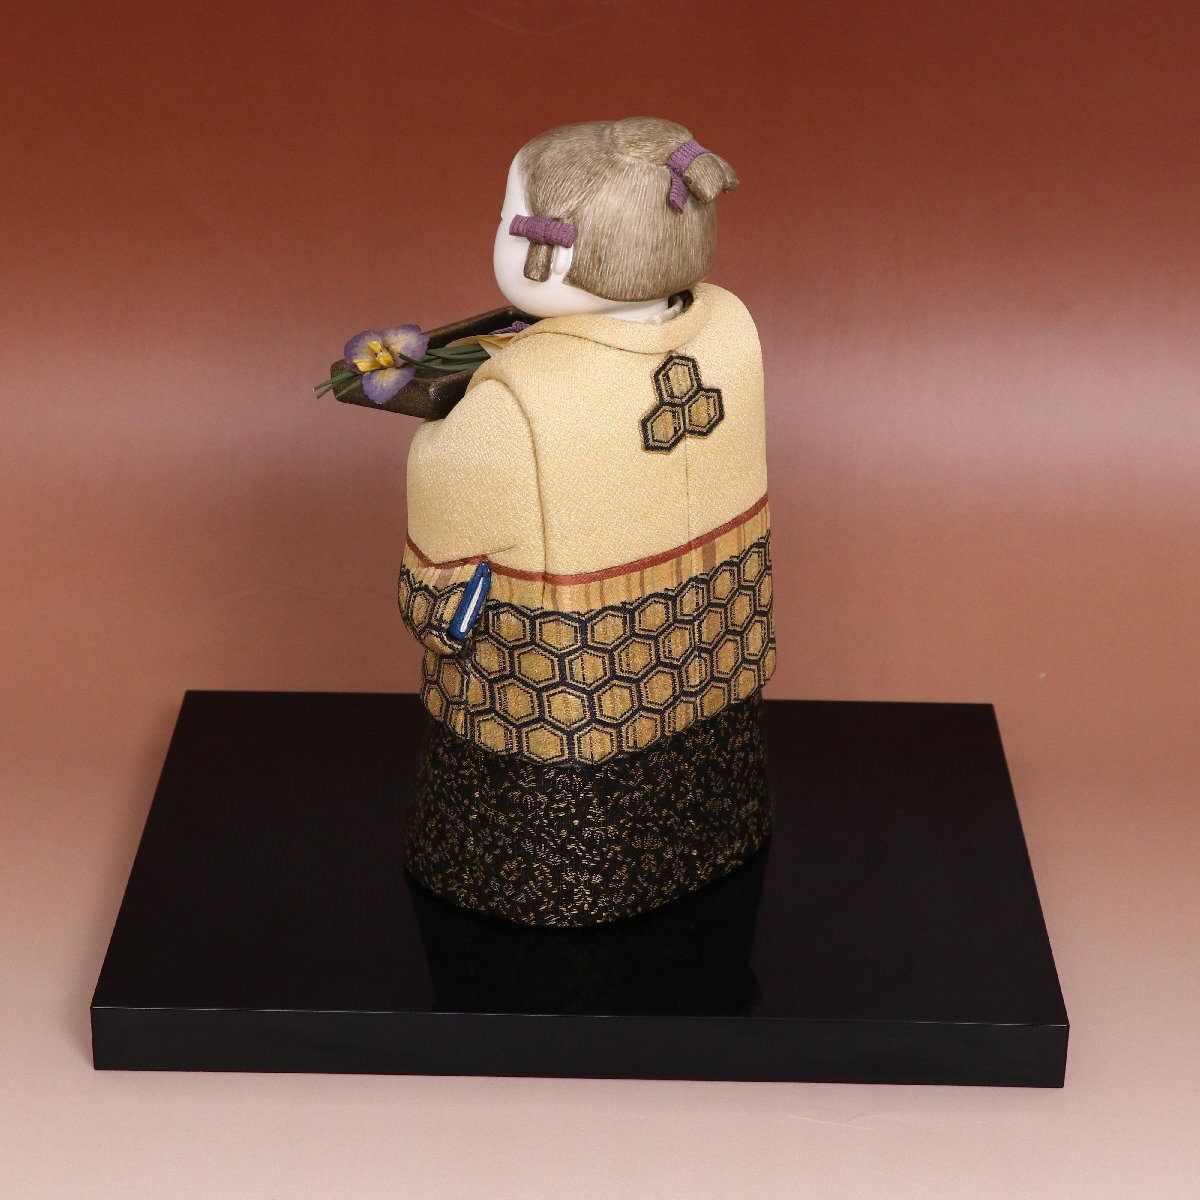 [ genuine work guarantee ][1 jpy ] popular author Omori . work tree carving kimekomi doll [ manner ..].. edge .. .. tree carving doll exclusive use pedestal attaching also box almost unused 